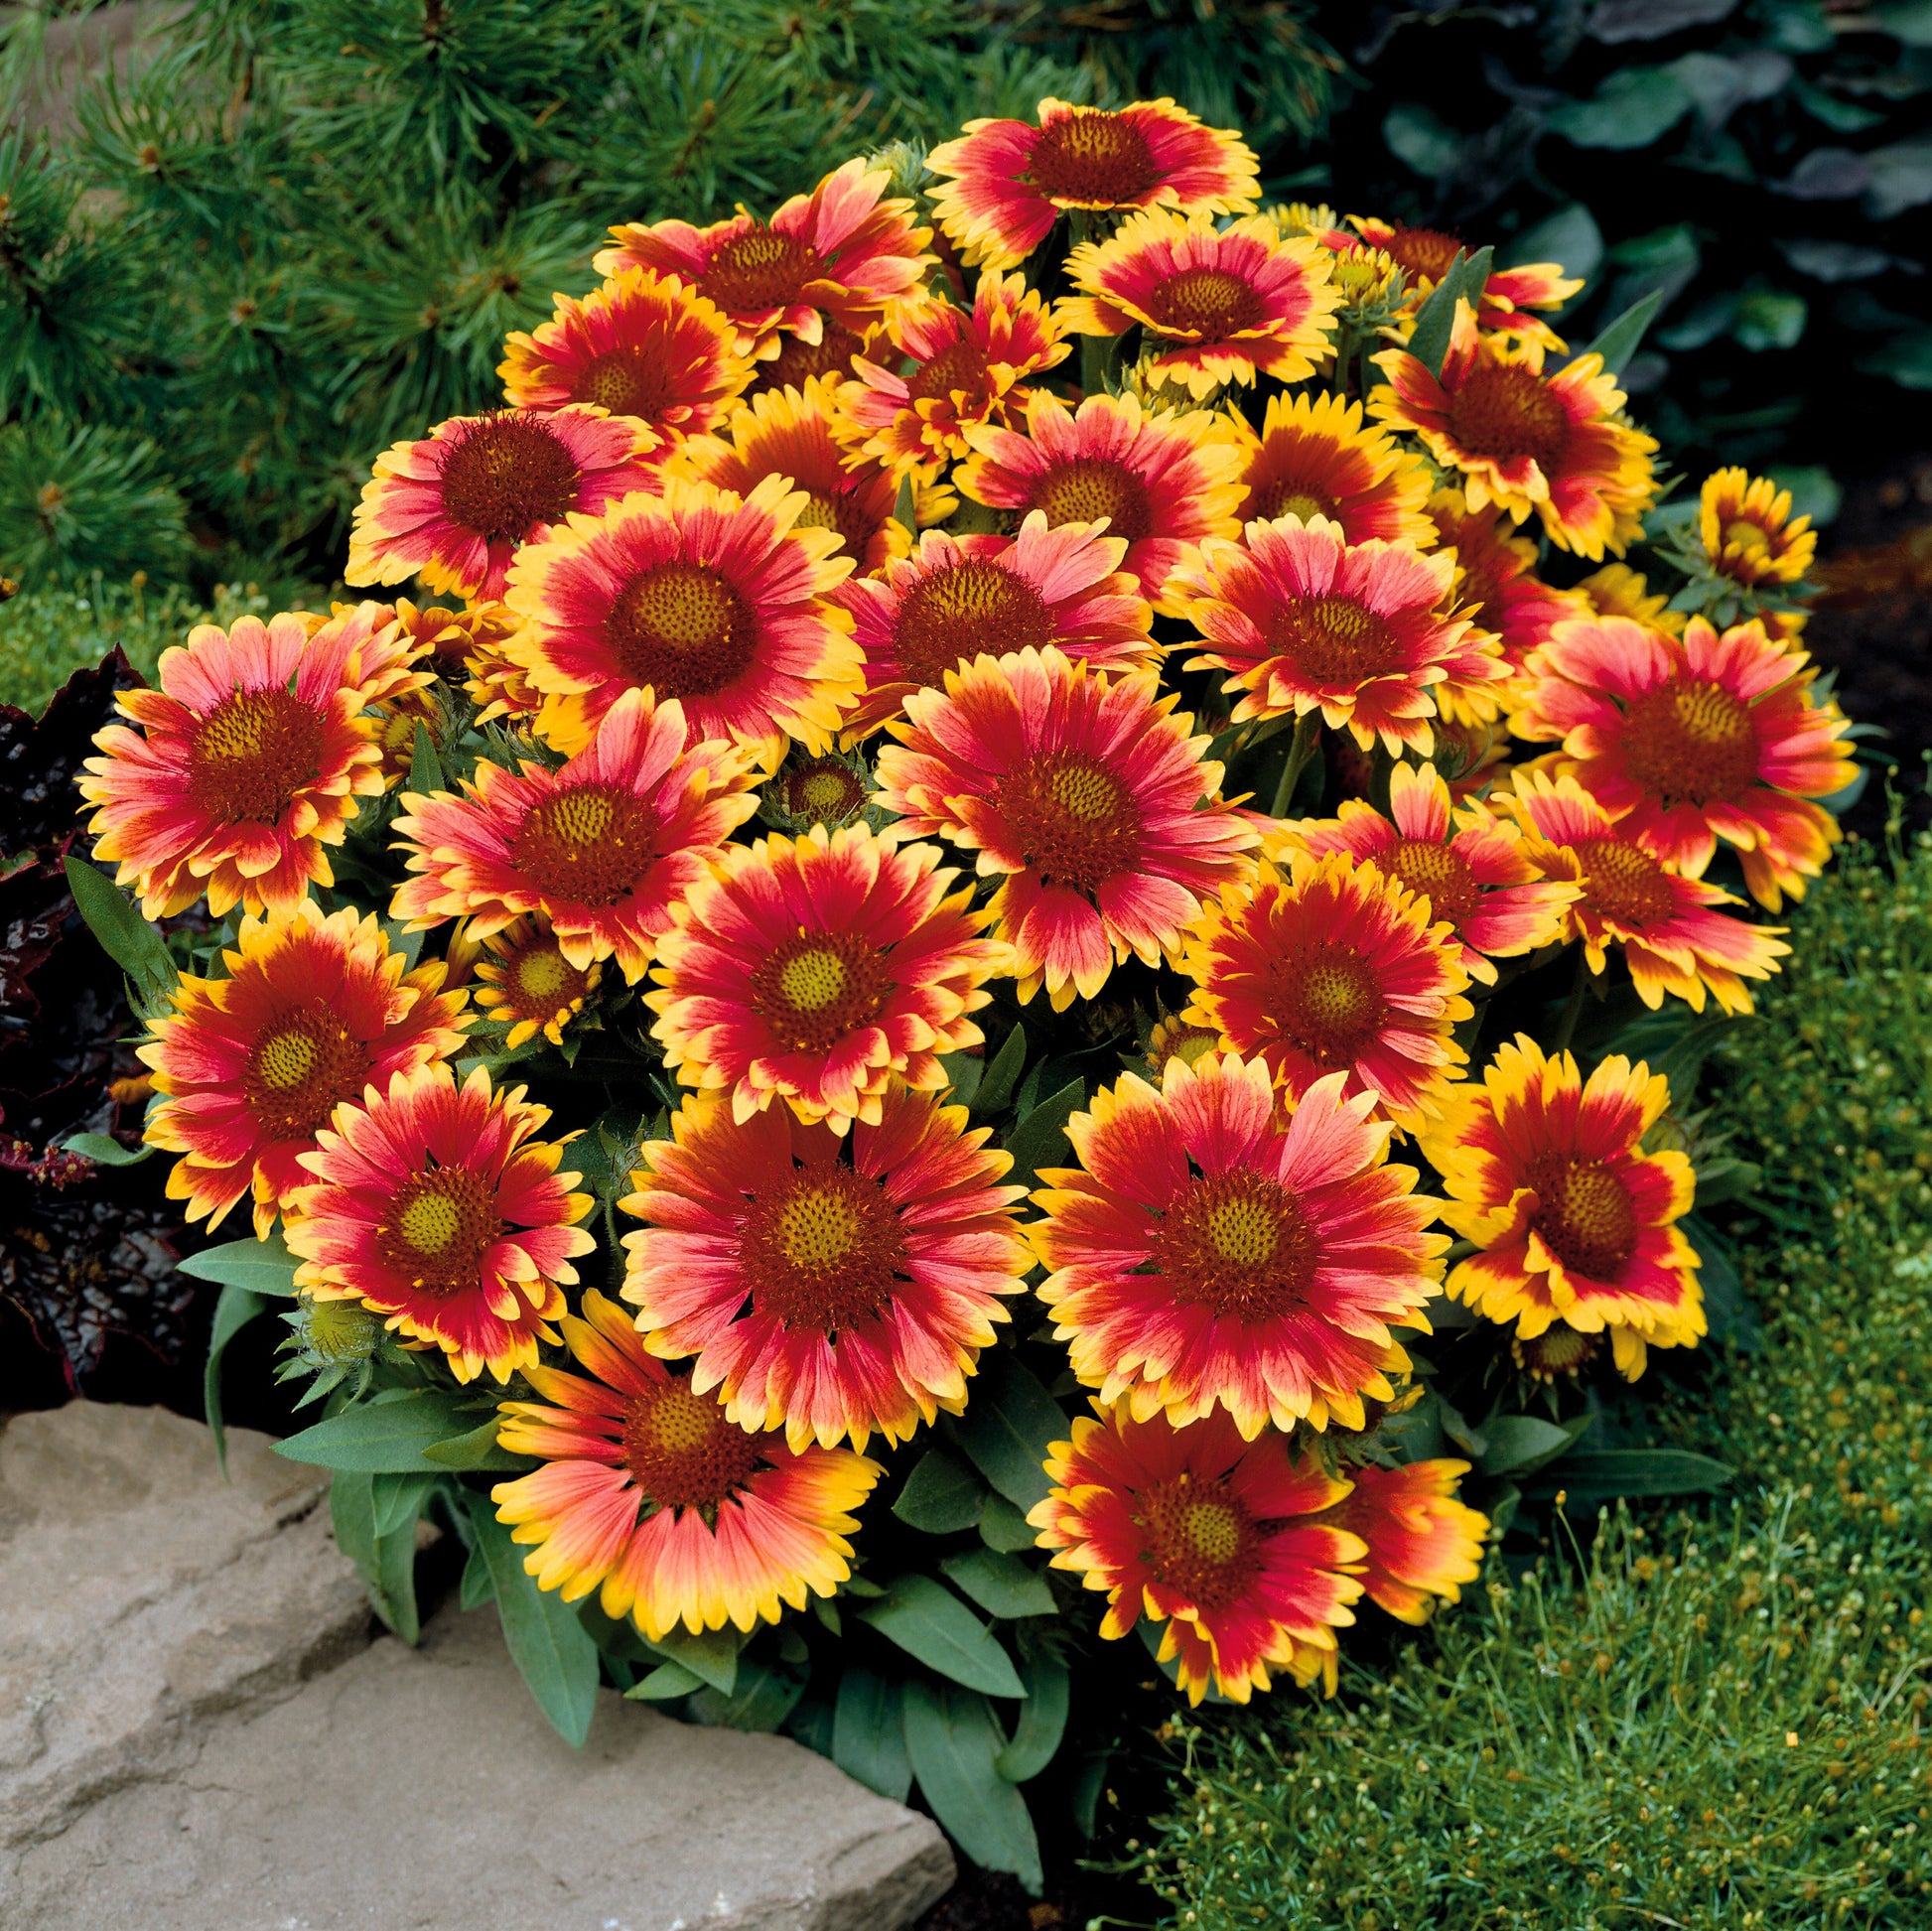 A Gorgeous Grouping of Red and Yellow "Arizona Sun" Blooms